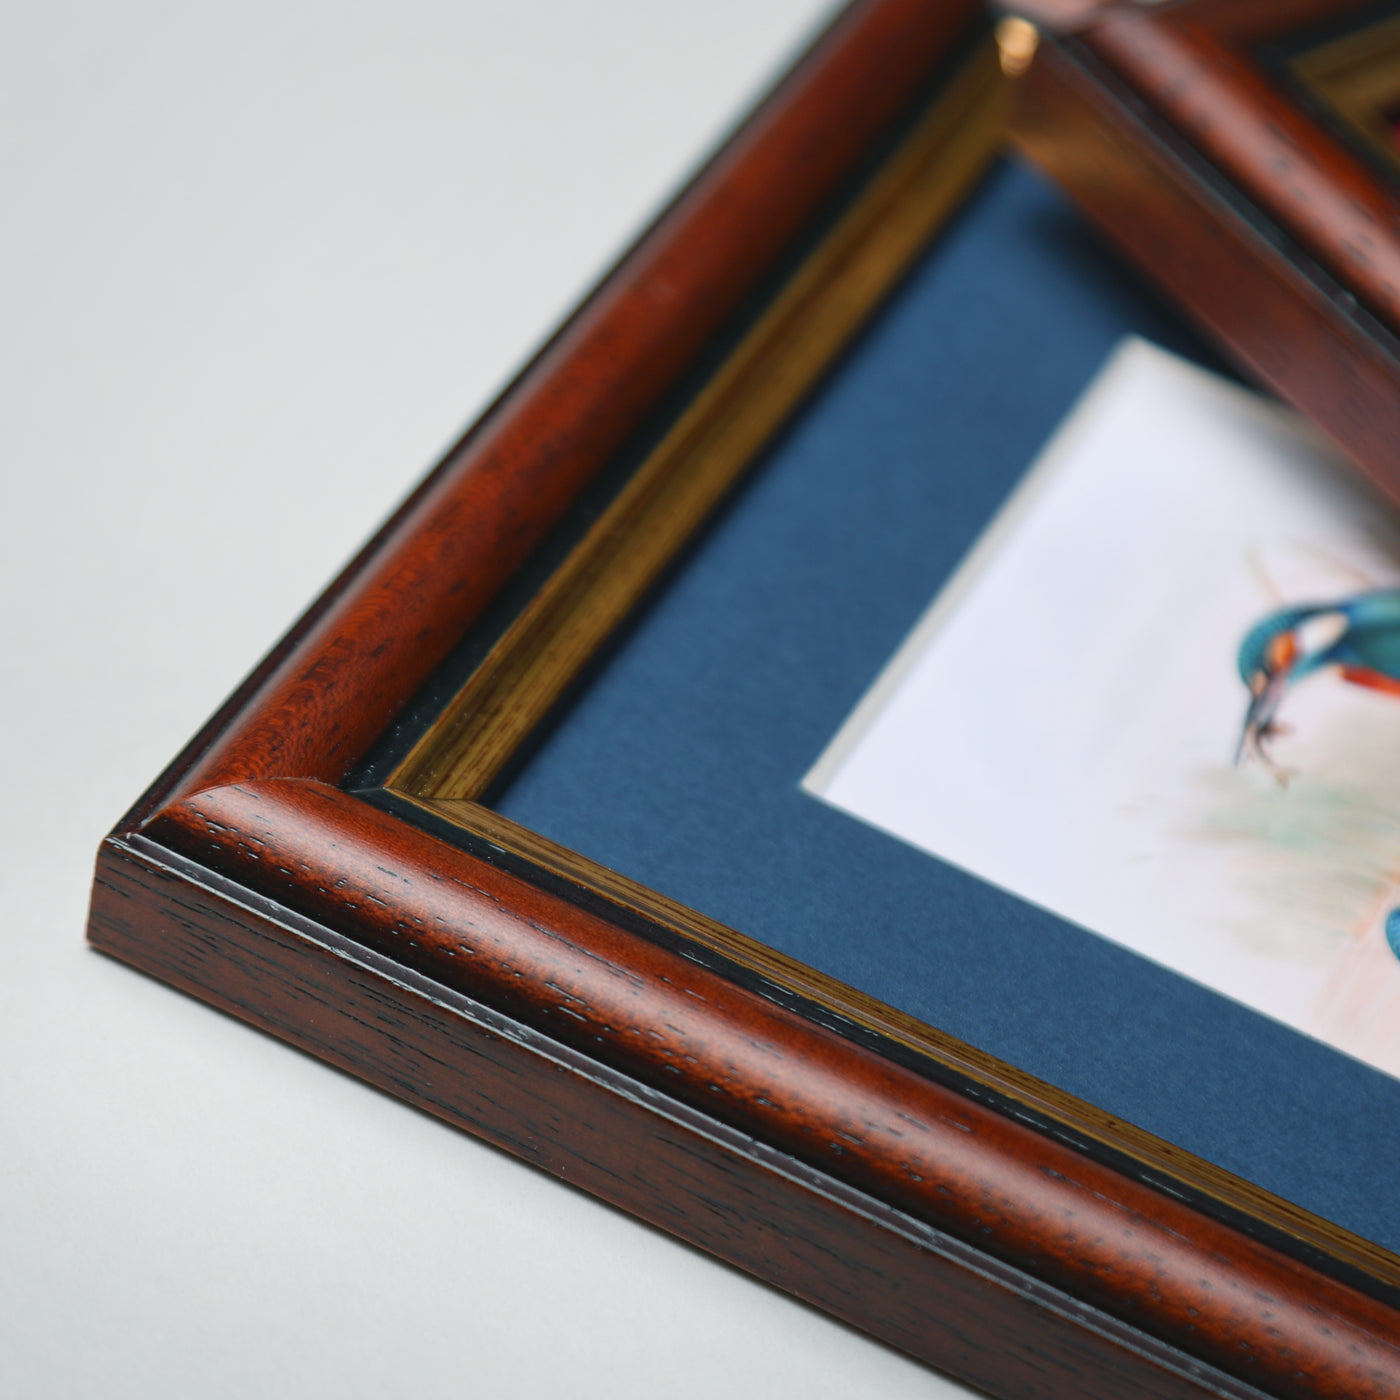 8x6 Brown & Gold Picture Frame with a 6x4 Mount